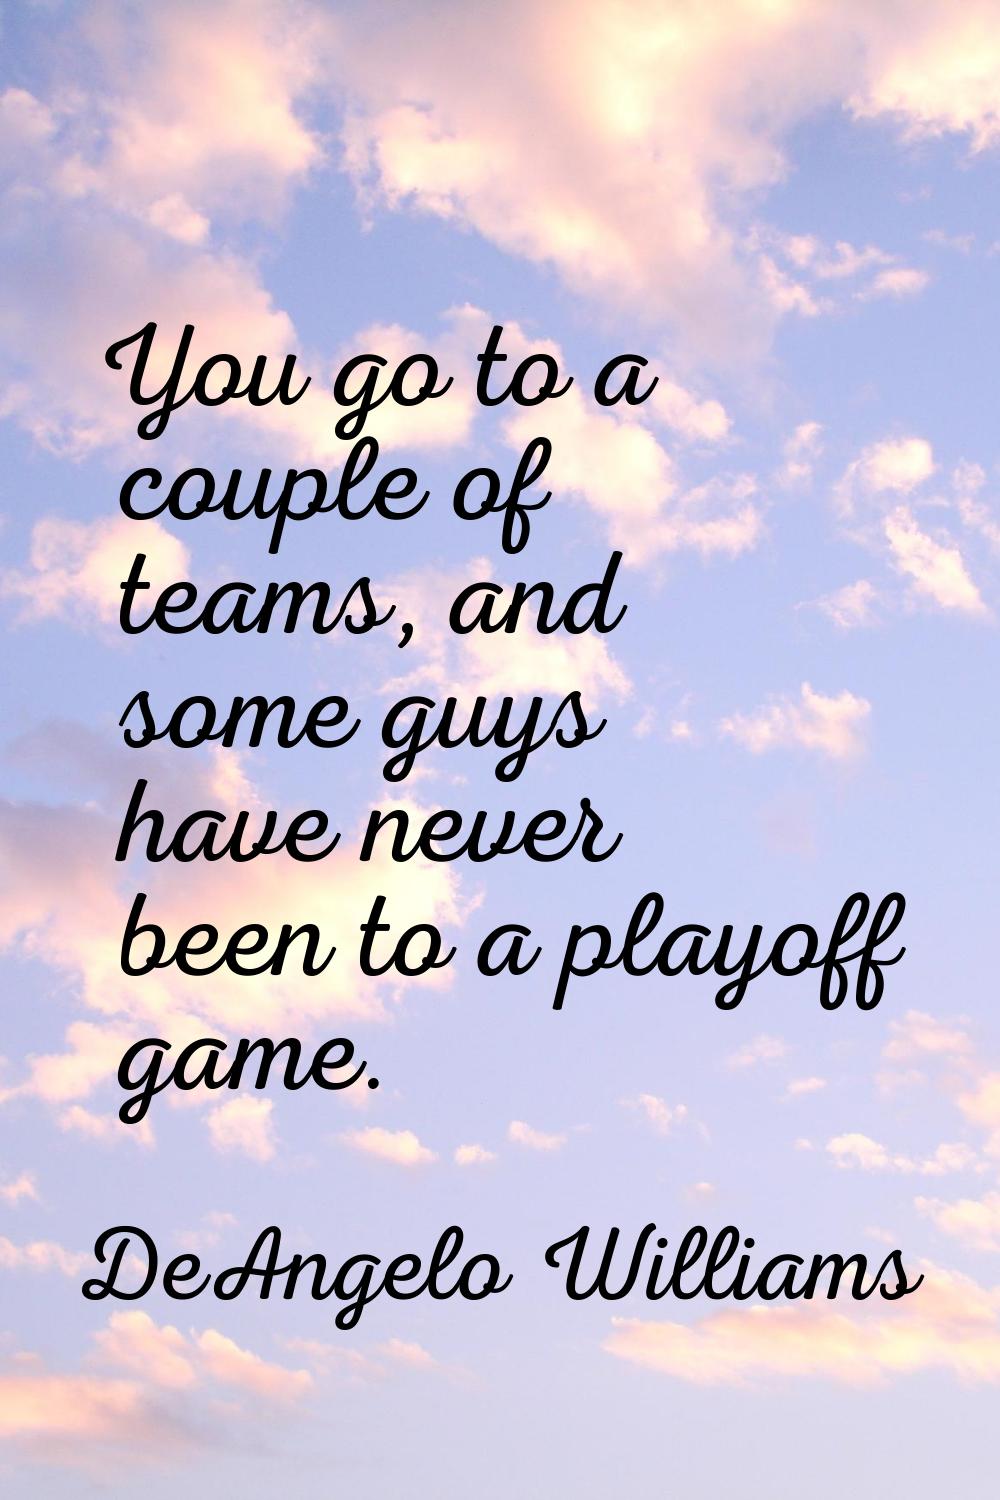 You go to a couple of teams, and some guys have never been to a playoff game.